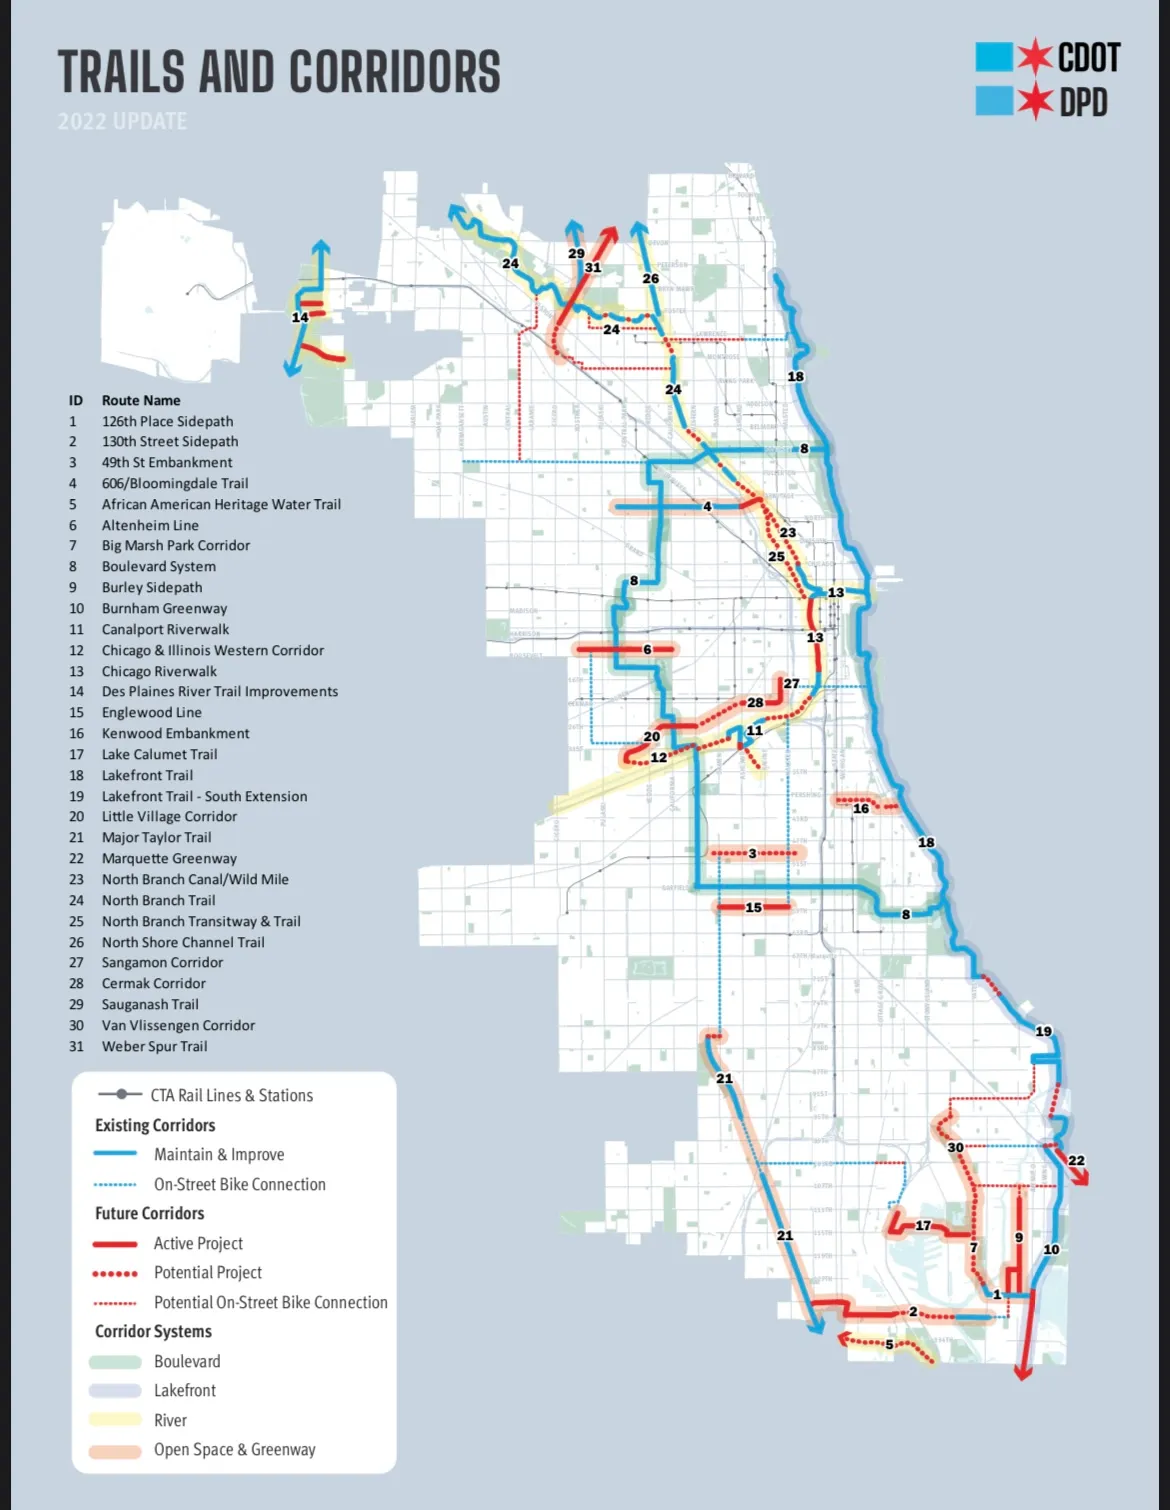 a map of the city of Chicago that denotes all of the trails and corridors. The legend includes the names of each route and how these trails interact with other city landmarks and aspects.